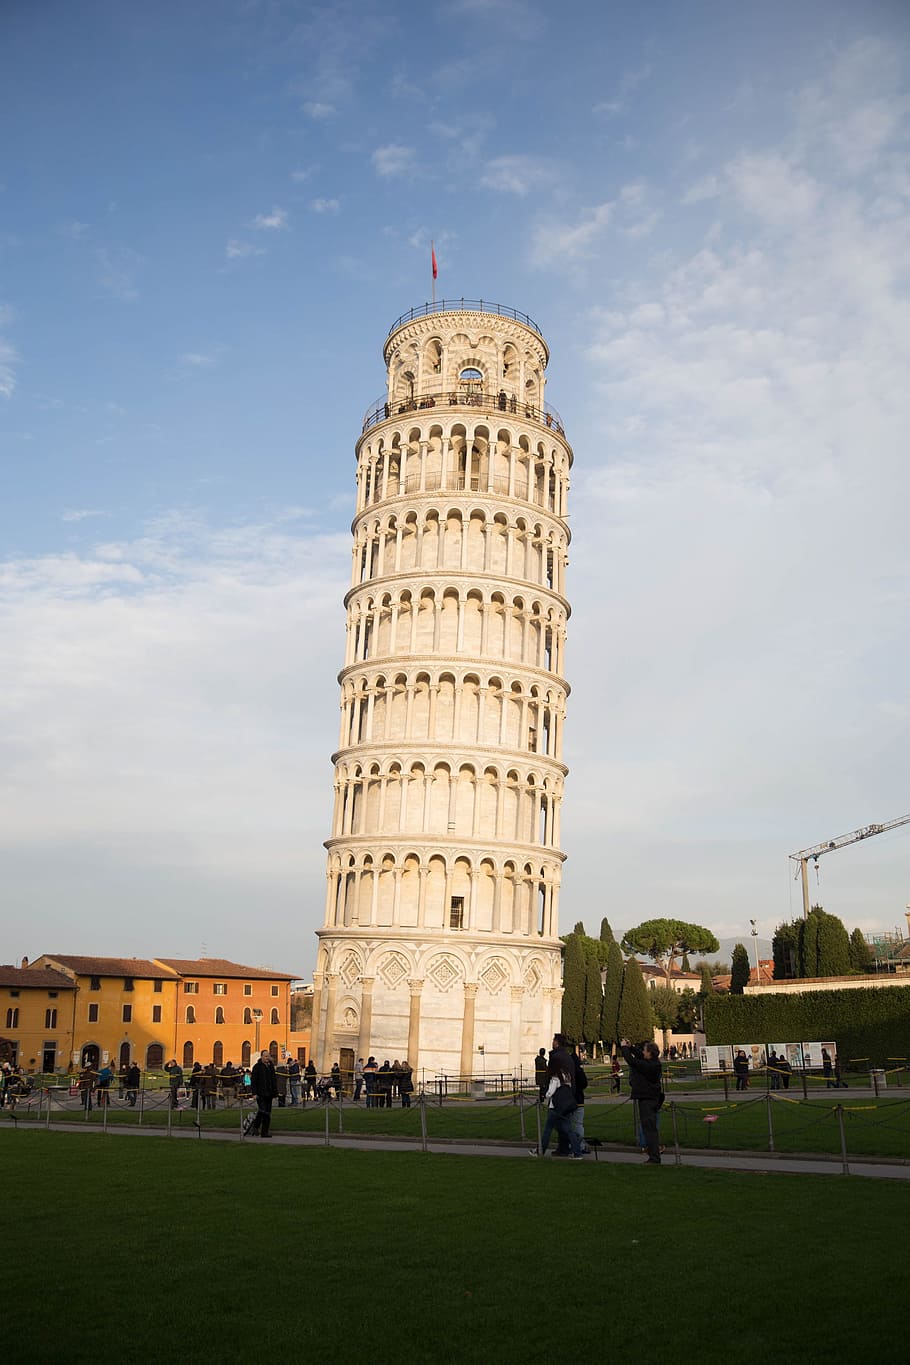 Leaning tower of Pisa, Italy surrounded by tourists, arch, architectural